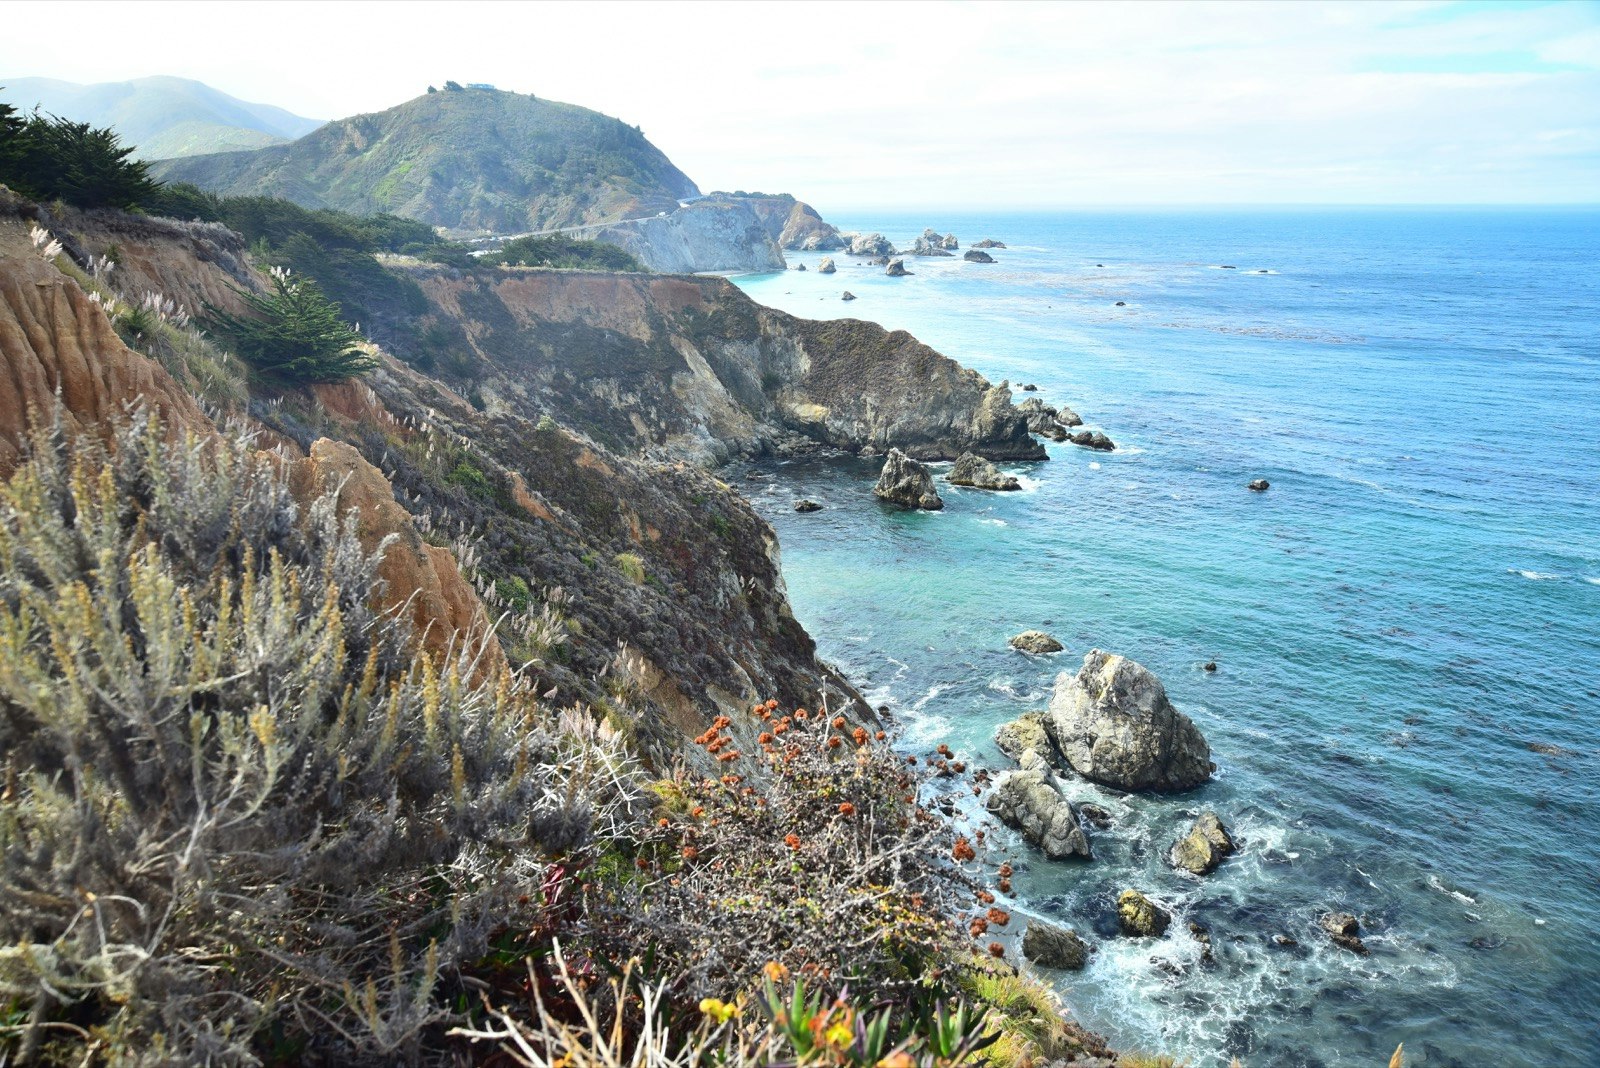 The coastline along Santa Cruz Island is rocky and filled with colorful wildflowers